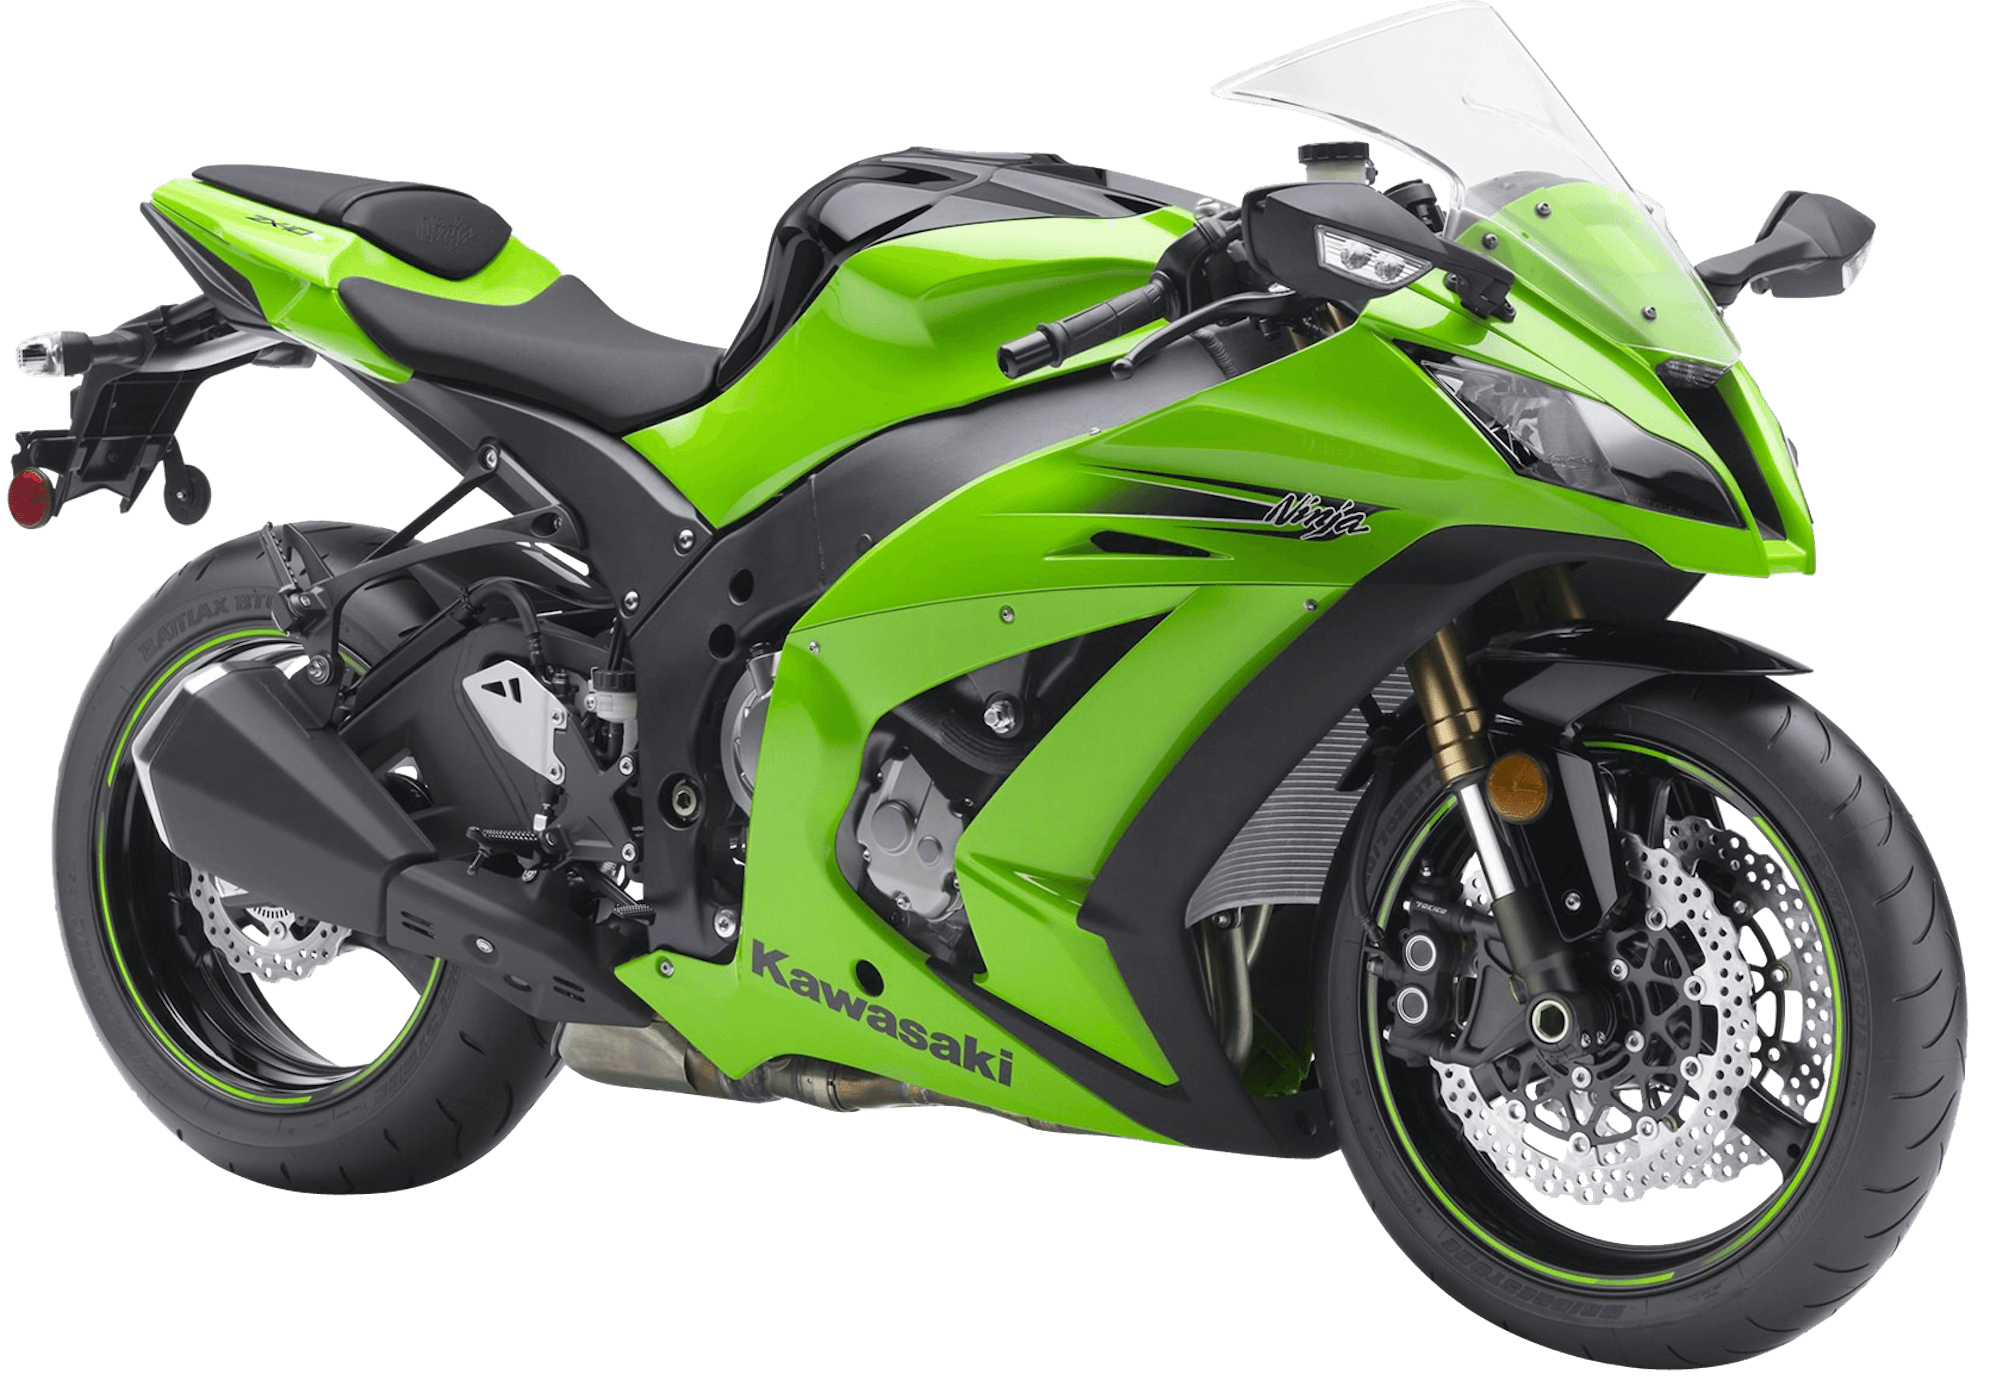 Find your best Kawasaki finance rate with Driva